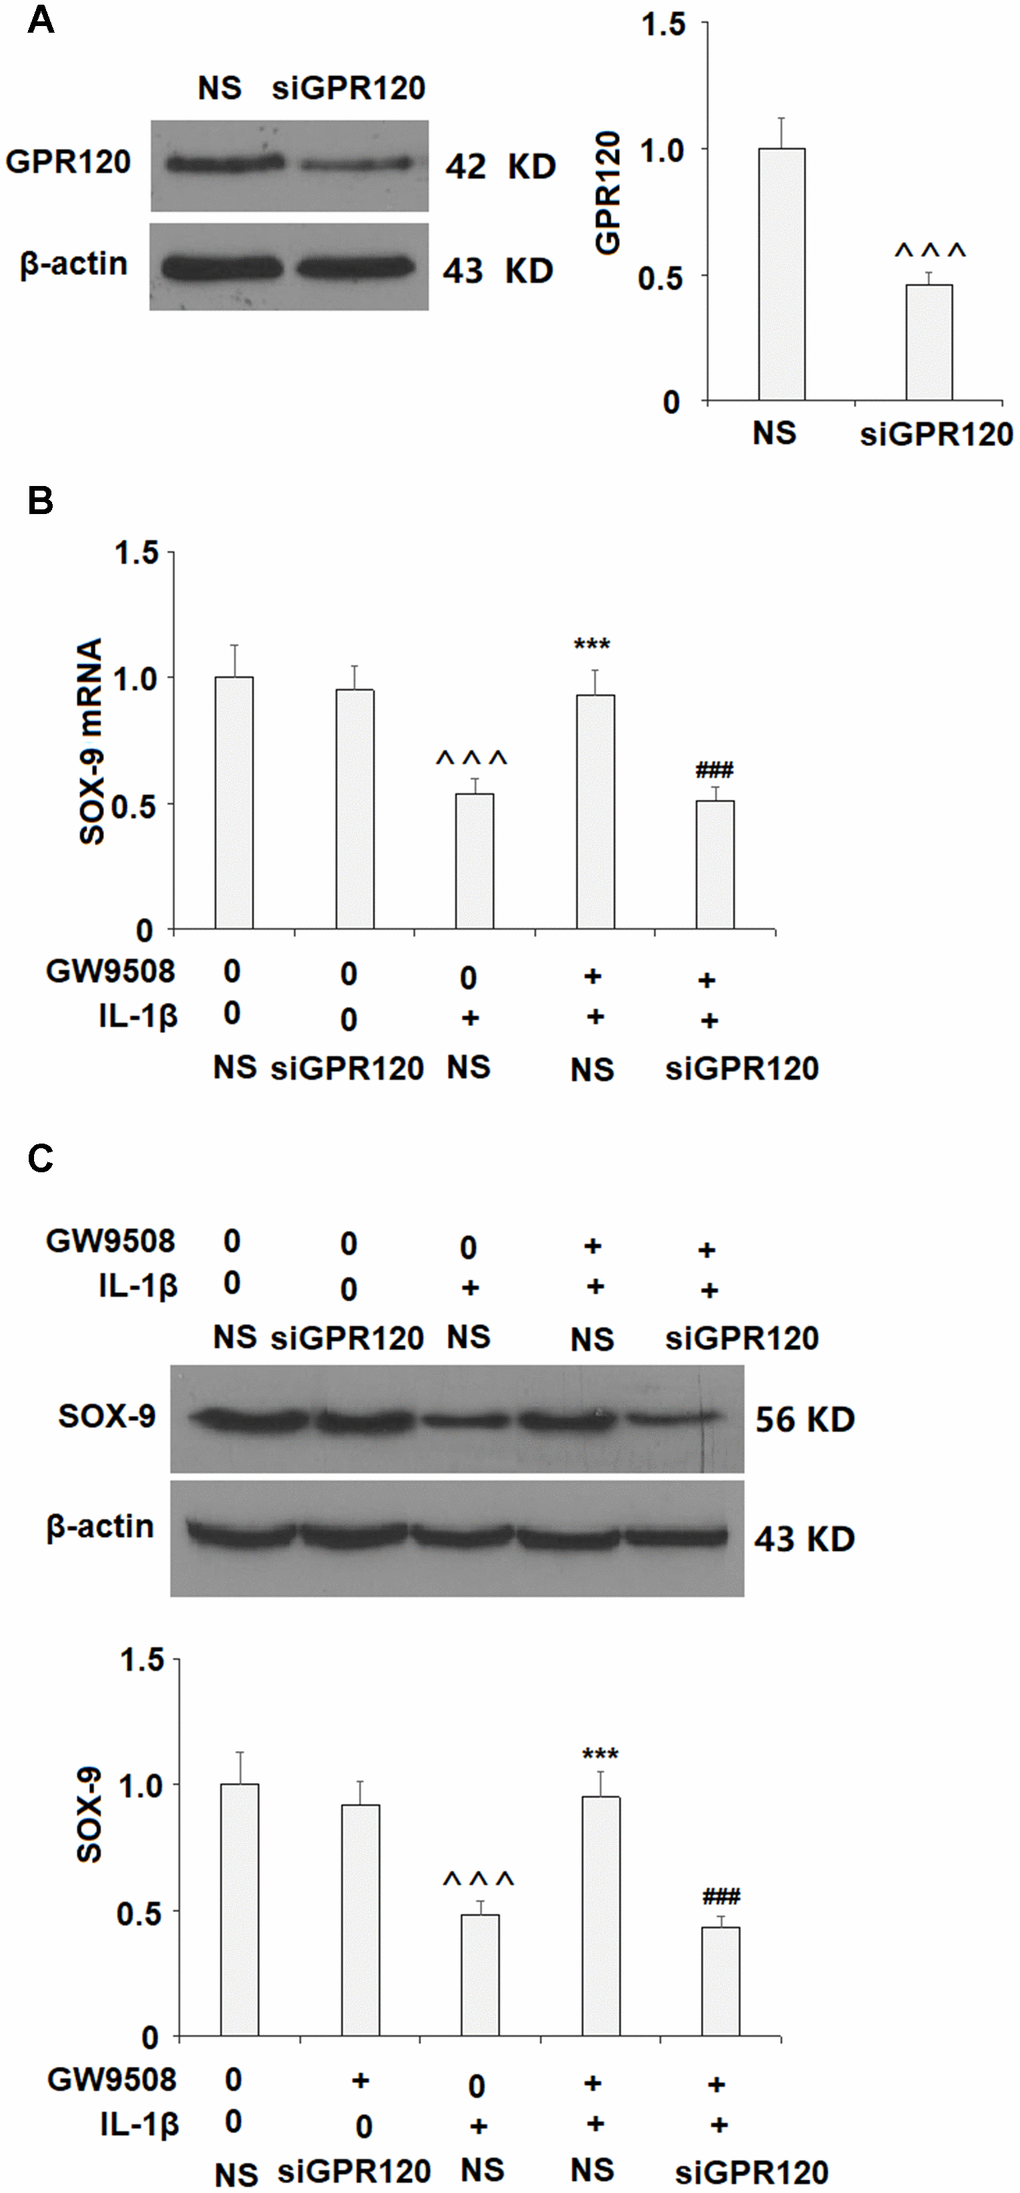 Knockdown of GPR120 abolished the protective effects of GW9508 on the expression of SOX-9. Cells were transfected with non-specific siRNA (NS) or GPR120 siRNA (siGPR120) for 24 h, followed by stimulation with or without GW9508 (50 μM) for 24 h. (A) Western blot analysis revealed the successful knockdown of GPR120. (B) SOX-9 mRNA; (C) SOX-9 protein (^^^, P